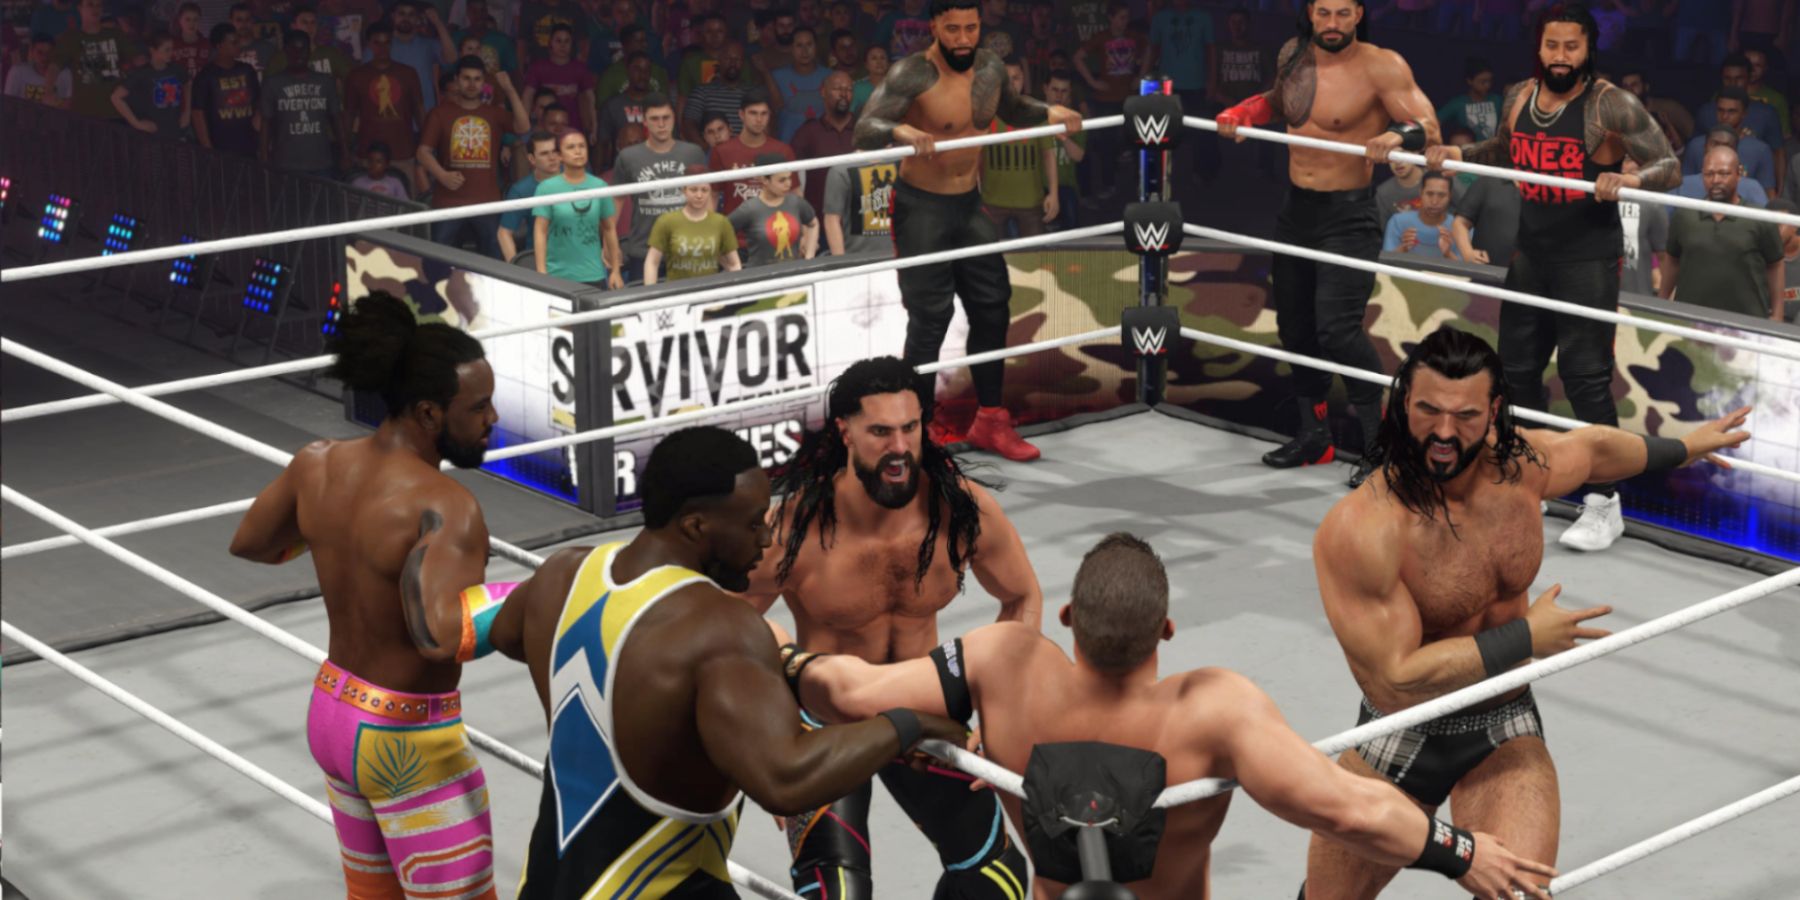 WWE 2K23 Survivor Series match double team from Rollins and Drew